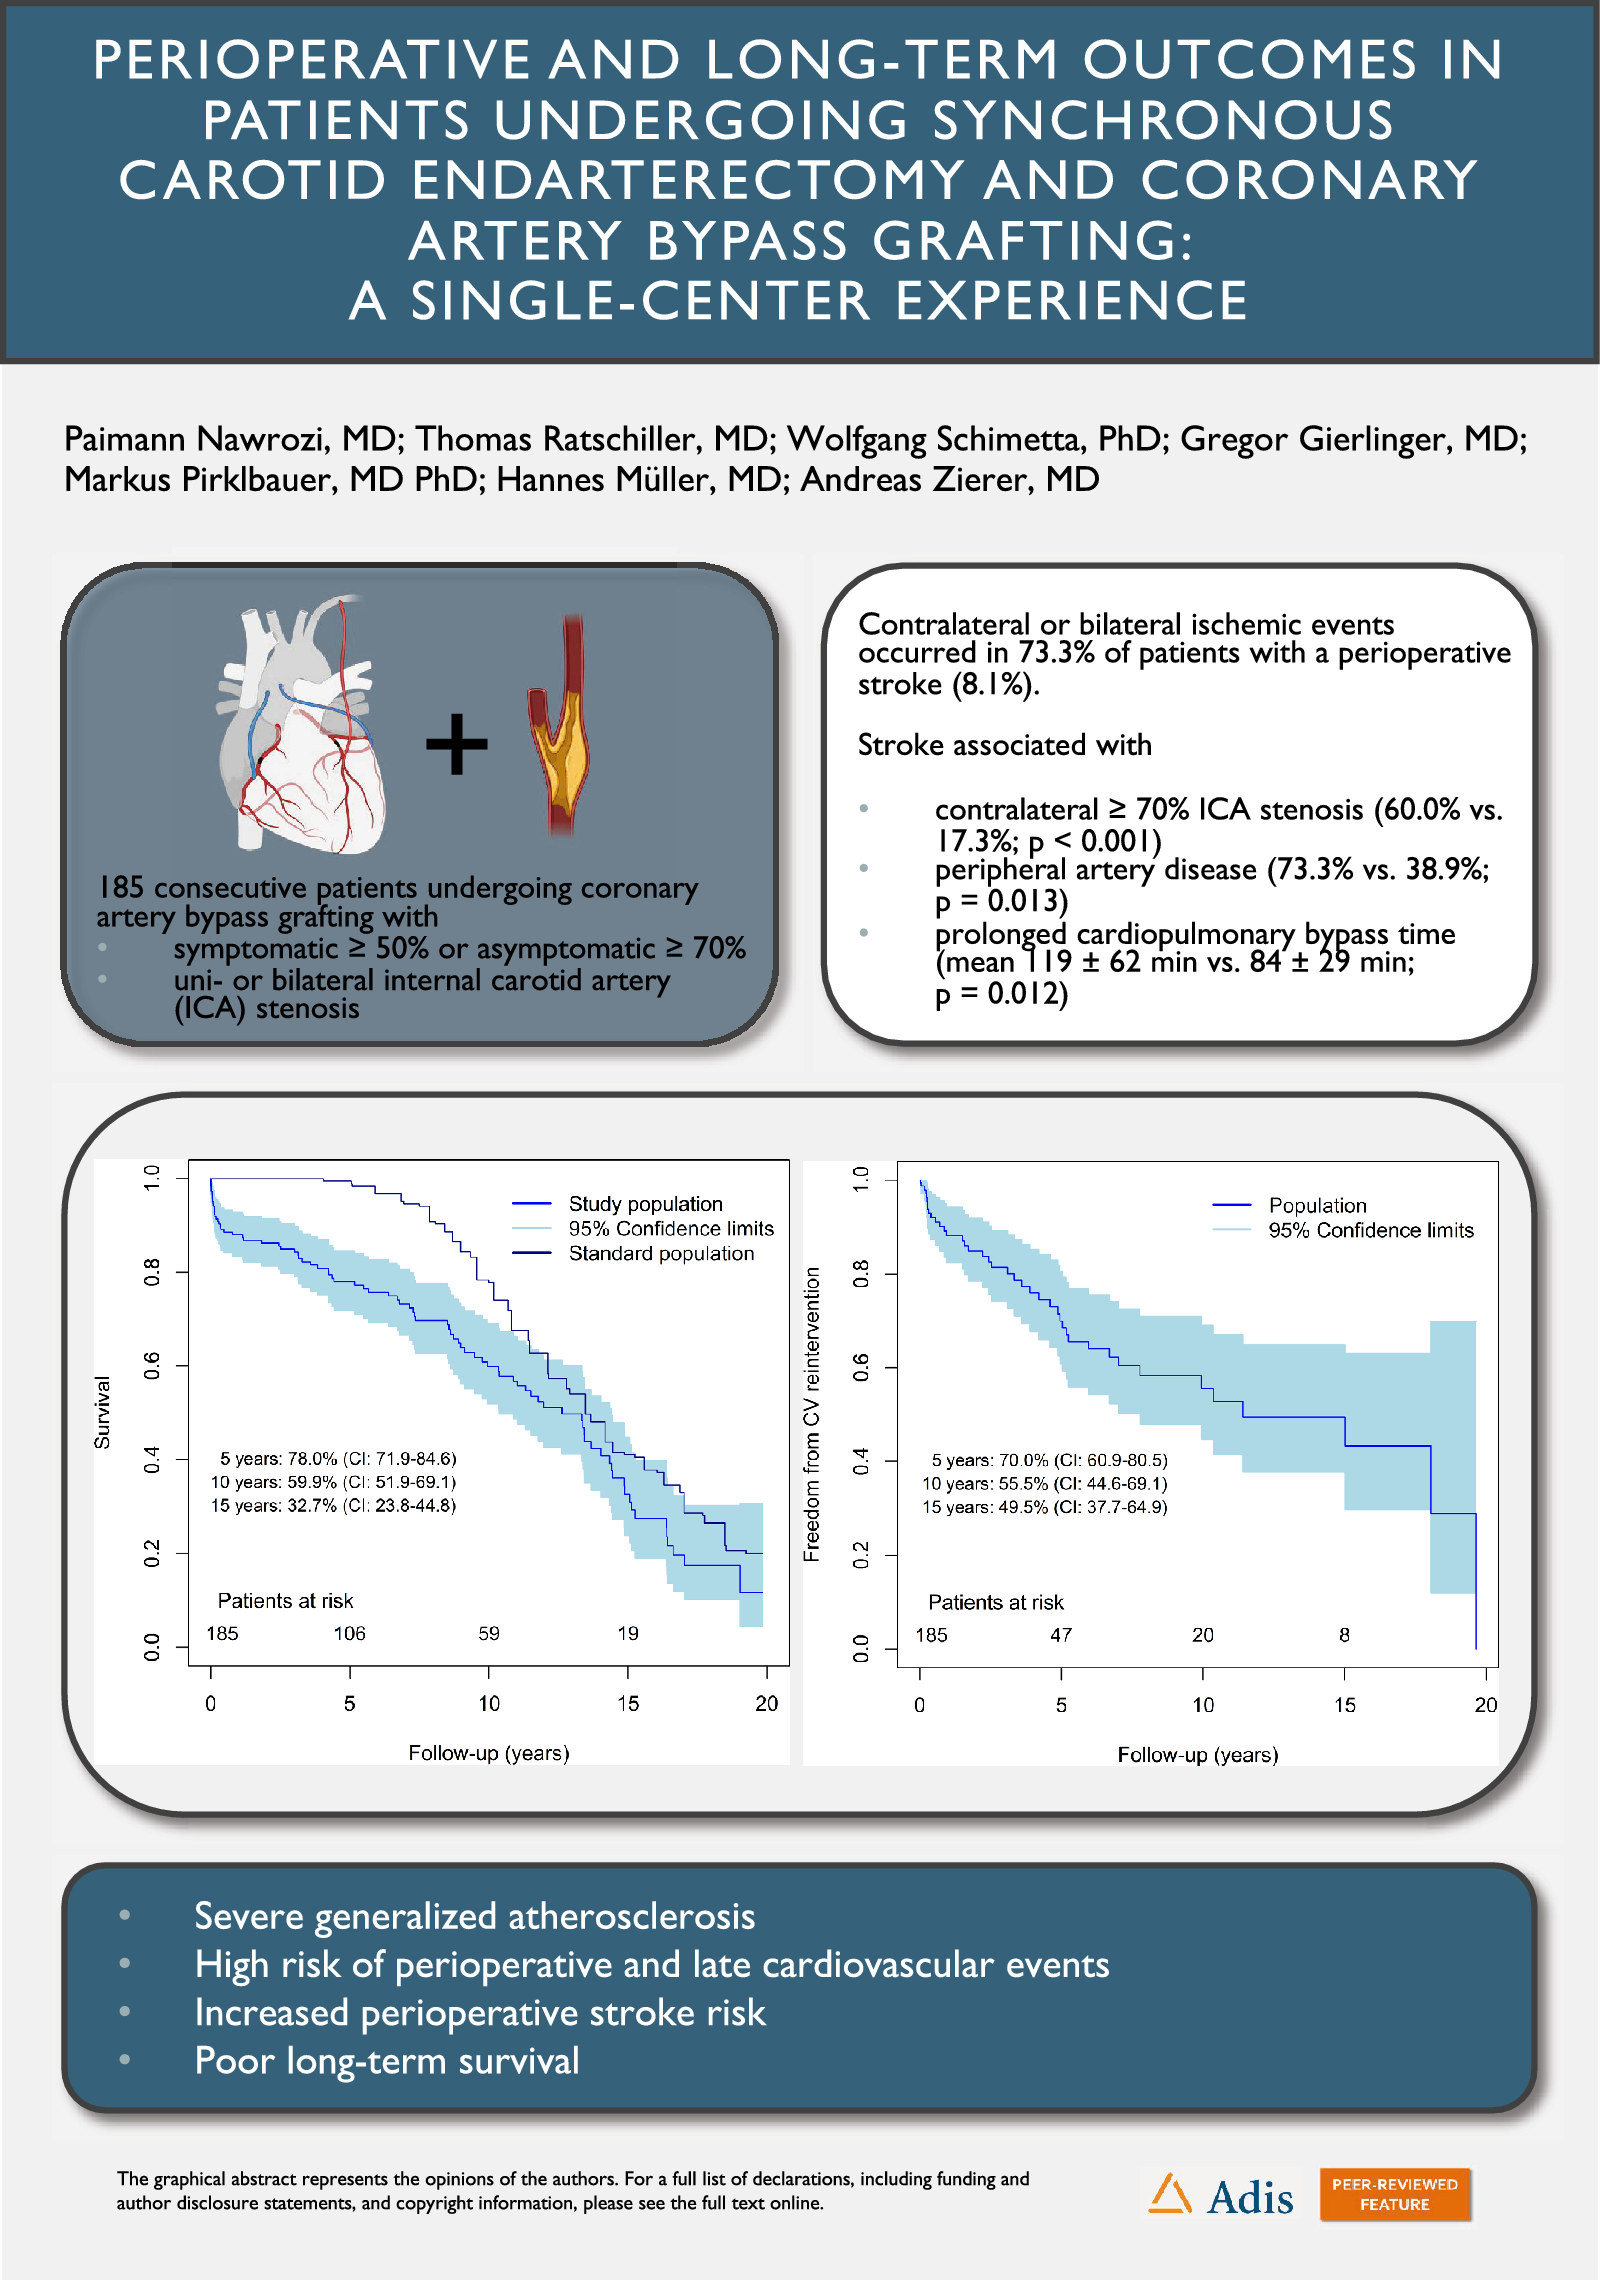 Perioperative and Long-Term Outcomes in Patients Undergoing Synchronous Carotid Endarterectomy and Coronary Artery Bypass Grafting: A Single-Center Experience